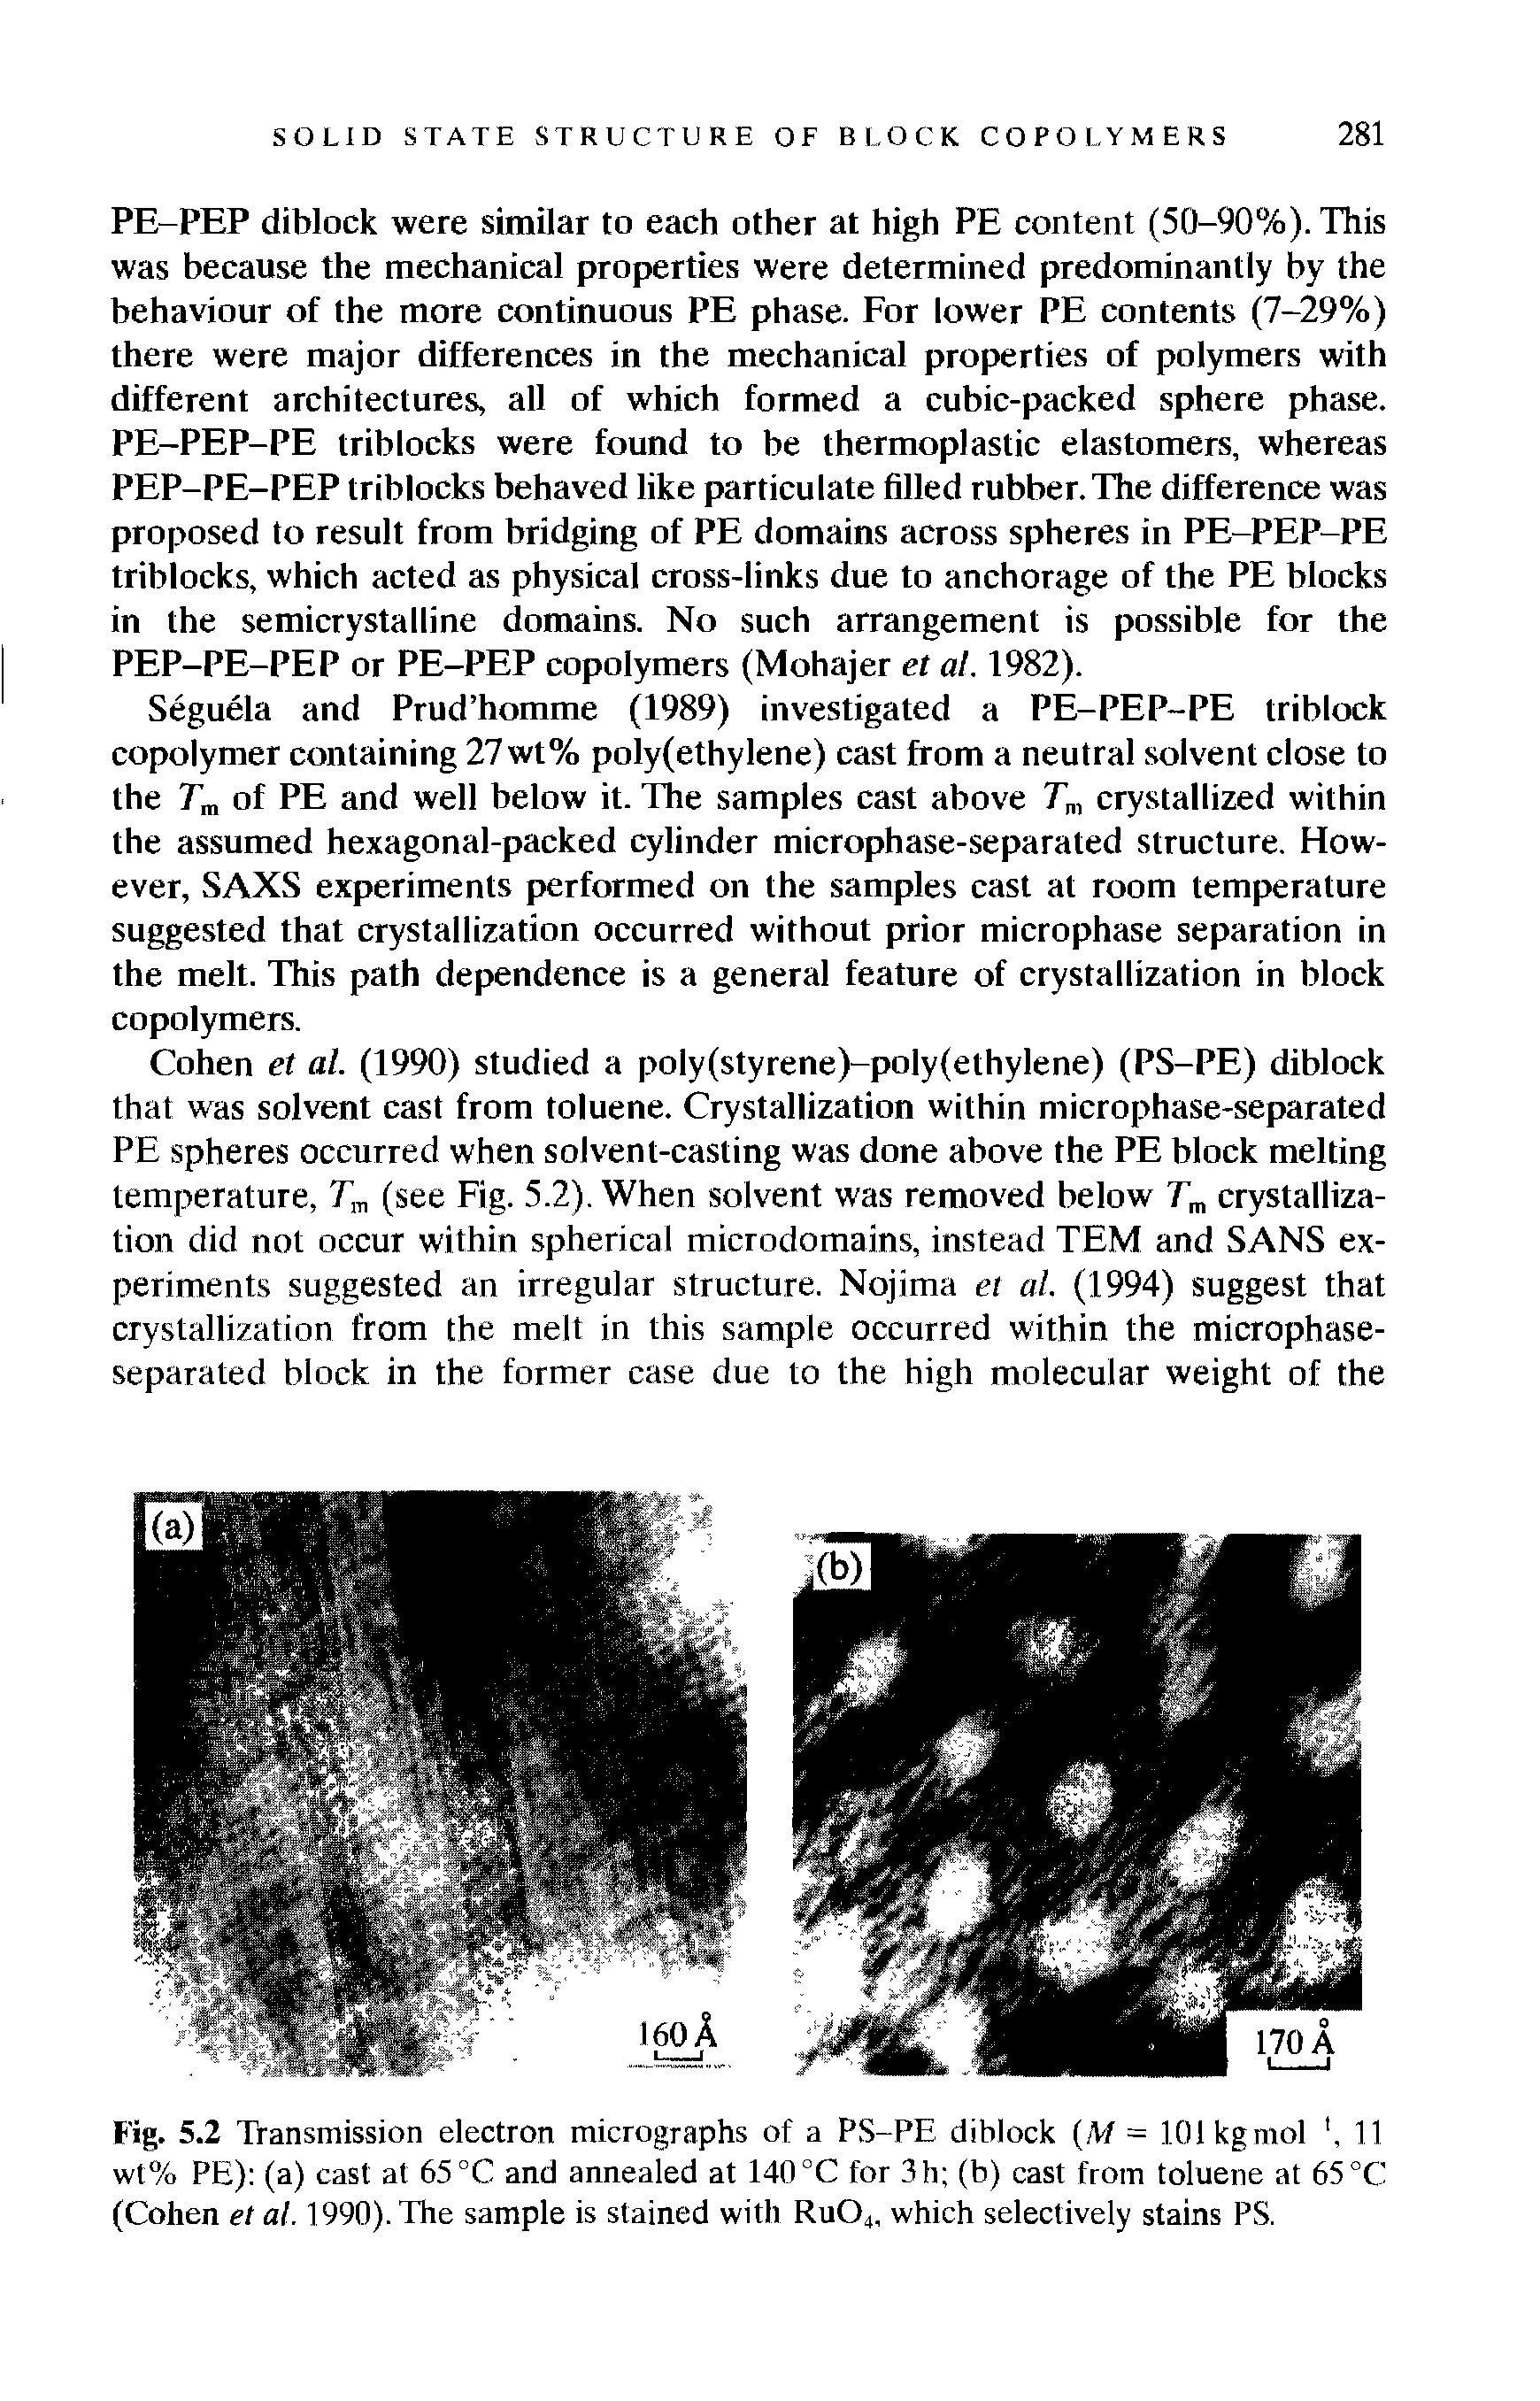 Fig. 5.2 Transmission electron micrographs of a PS-PE diblock (M = 101 kg mol 11 wt% PE) (a) cast at 65 °C and annealed at 140 °C for 3h (b) cast from toluene at 65 °C (Cohen et al. 1990). The sample is stained with Ru04, which selectively stains PS.